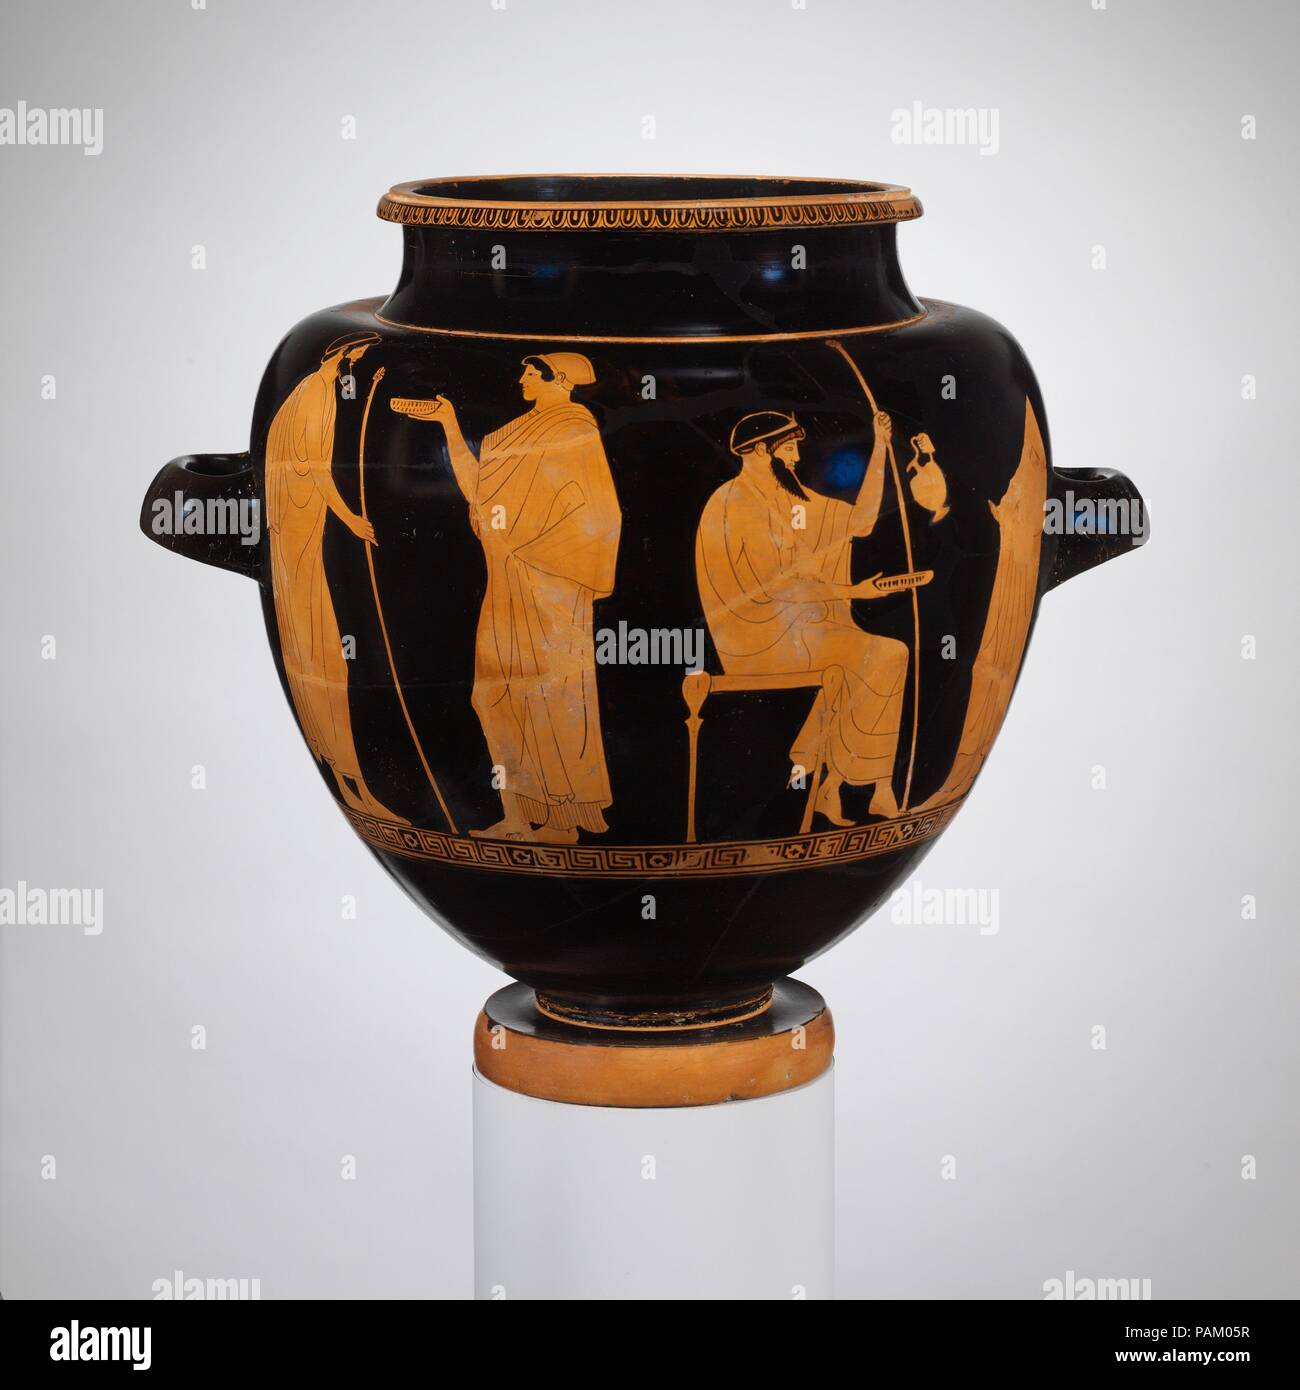 Terracotta stamnos (jar). Culture: Greek, Attic. Dimensions: H. 14 3/8 in. (36.5 cm); diameter of mouth  8 3/4 in. (22.2 cm); diameter of foot  5 15/16 in. (15.1 cm). Date: ca. 480 B.C..  Obverse, men and women  Reverse, men and youths  The Copenhagen and Syriskos Painters were characterized by J. D. Beazley, the authority on Greek vase-painting, as 'brothers.' They belonged to the same workshop, and in some cases as in this stamnos, Beazley was unable to make an attribution to one or the other. Some scholars have speculated that they were one artist.  The subject matter shows two aspects of a Stock Photo